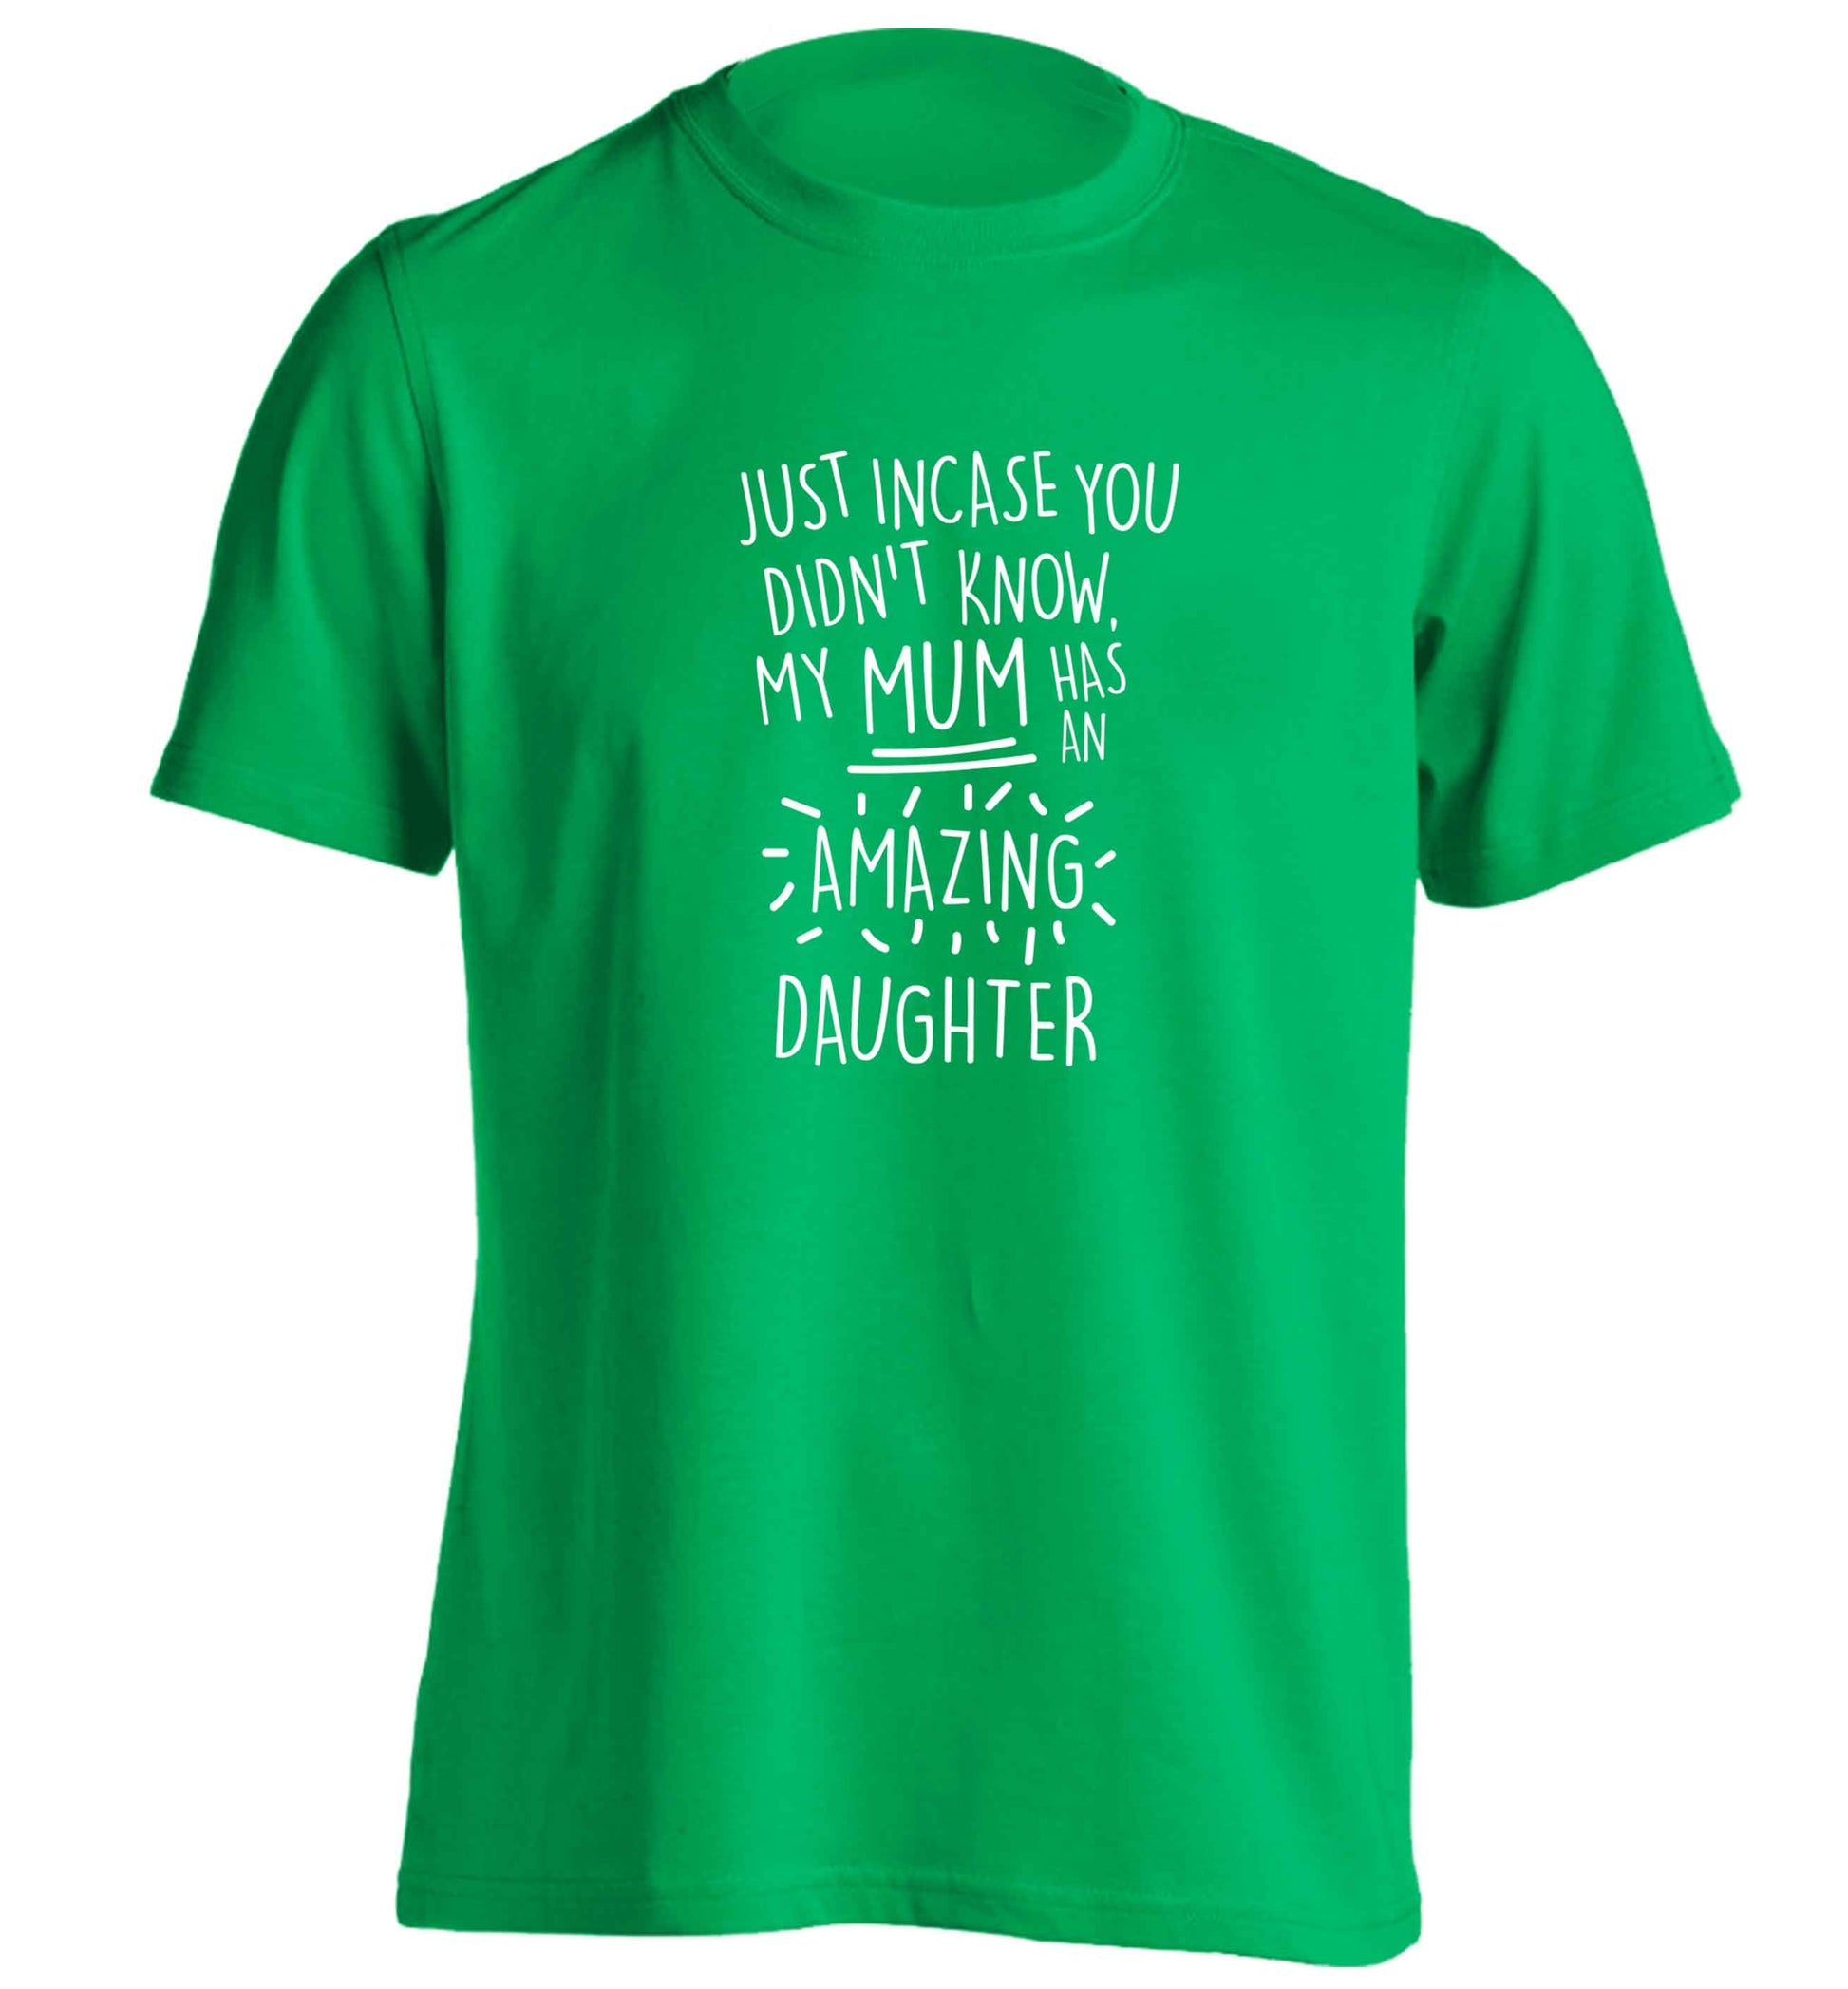 Just incase you didn't know my mum has an amazing daughter adults unisex green Tshirt 2XL